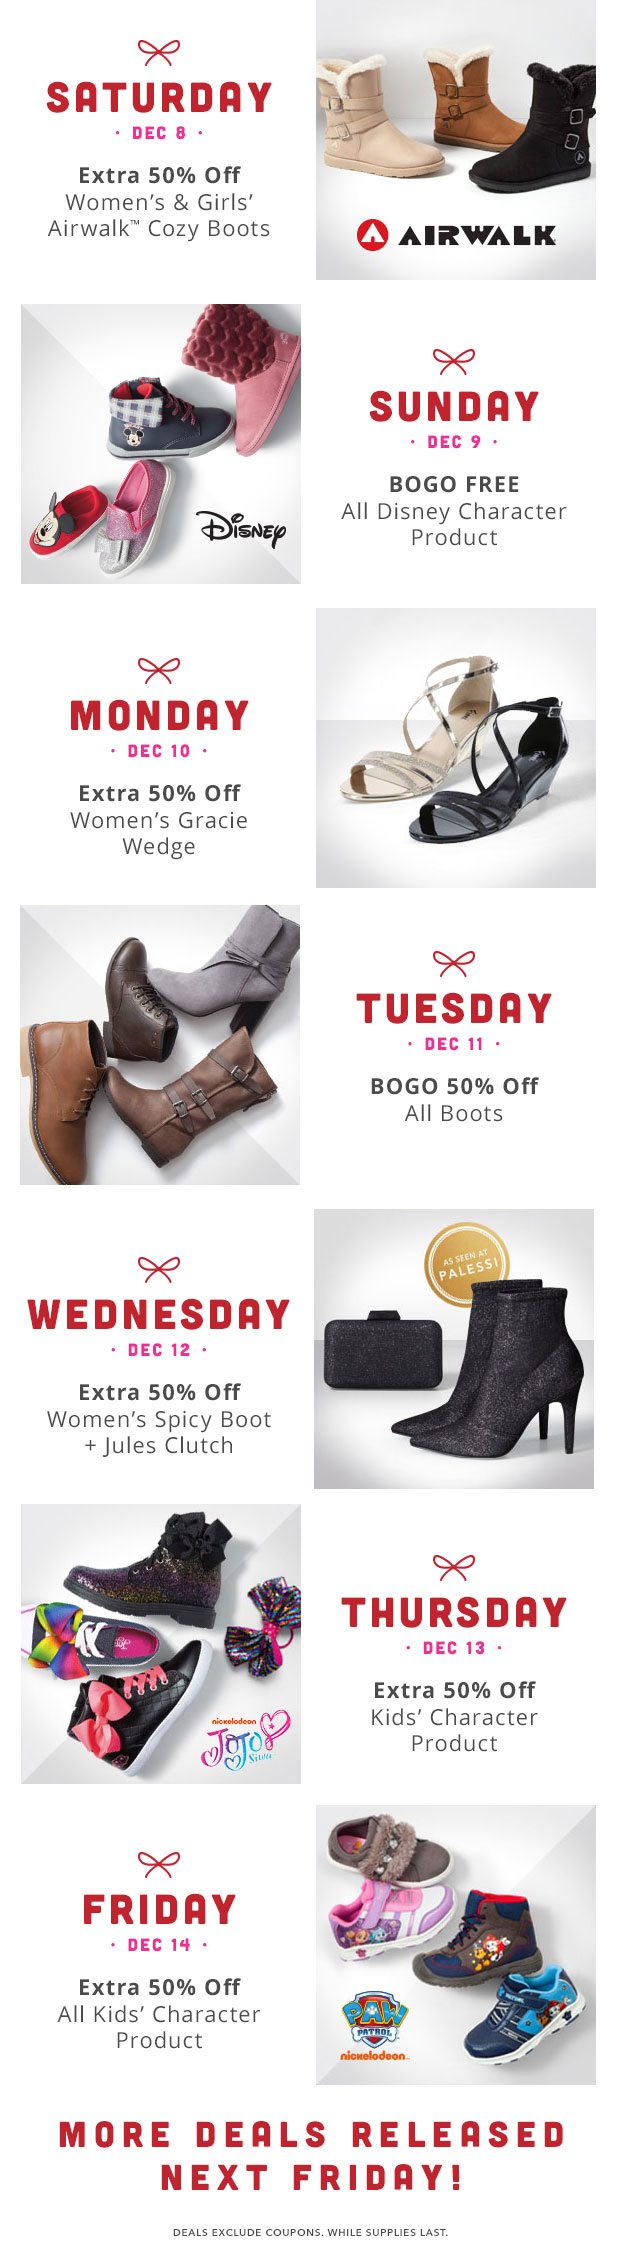 payless daily deals